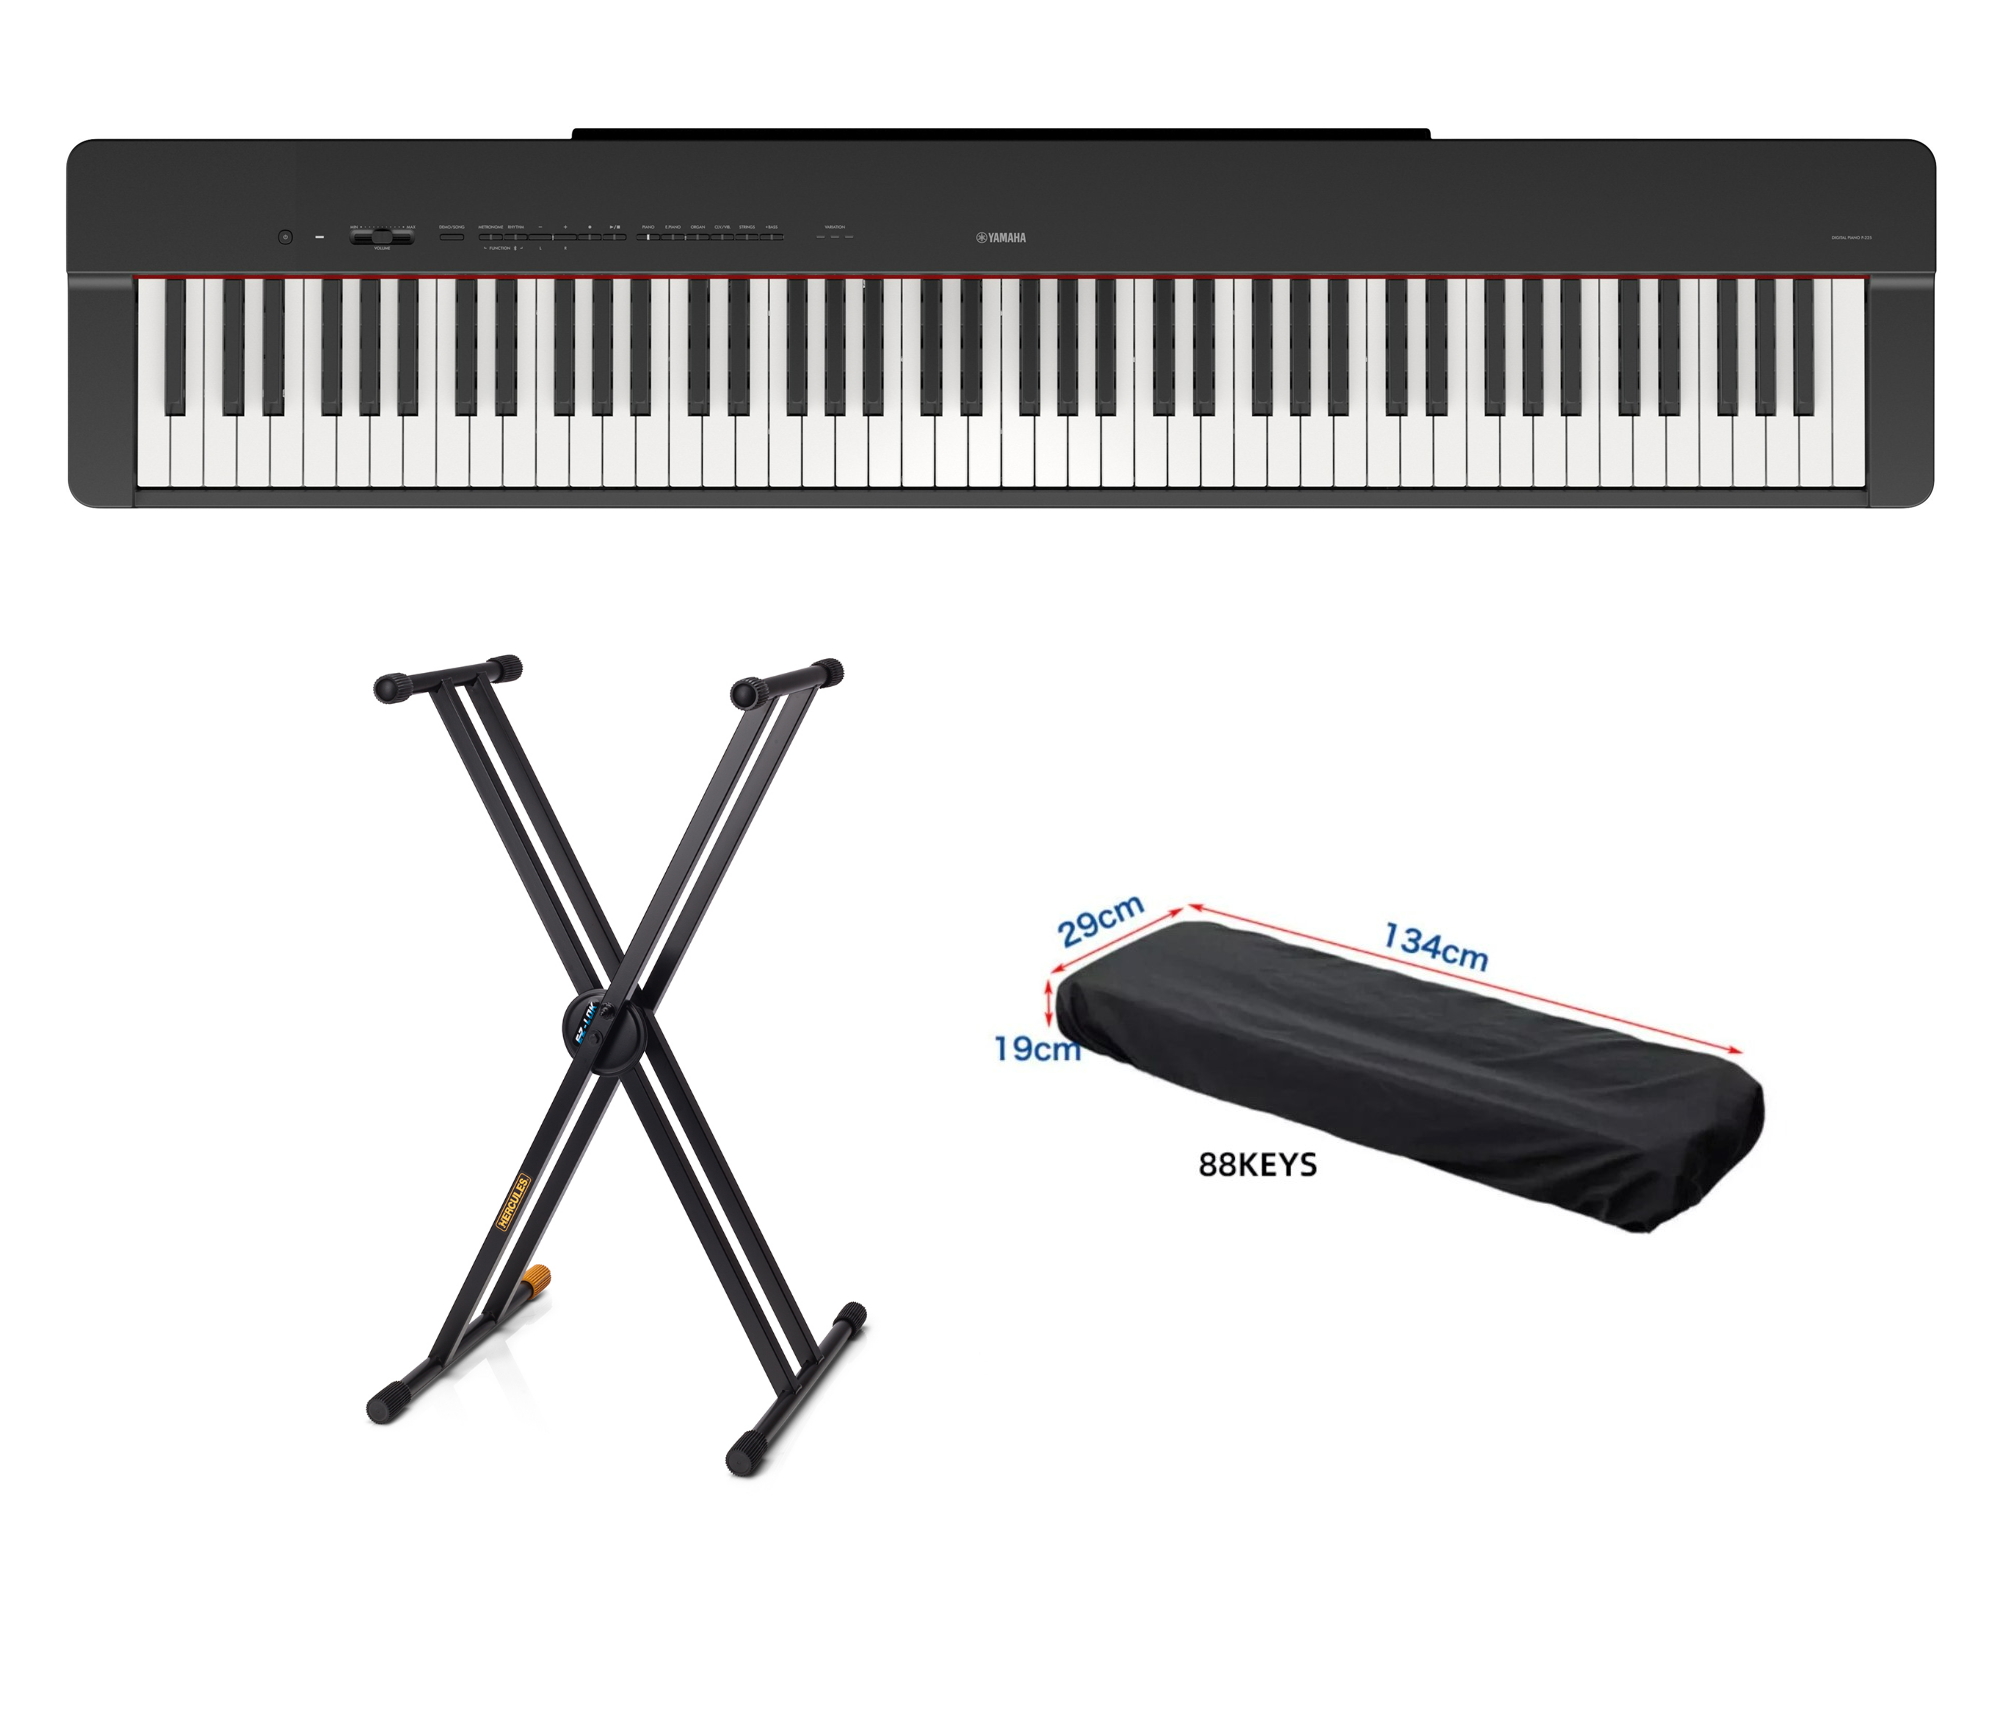 [*3 Years Warranty] Yamaha P-225 Digital Piano (with Pedal and AC Adaptor) New Model 2023